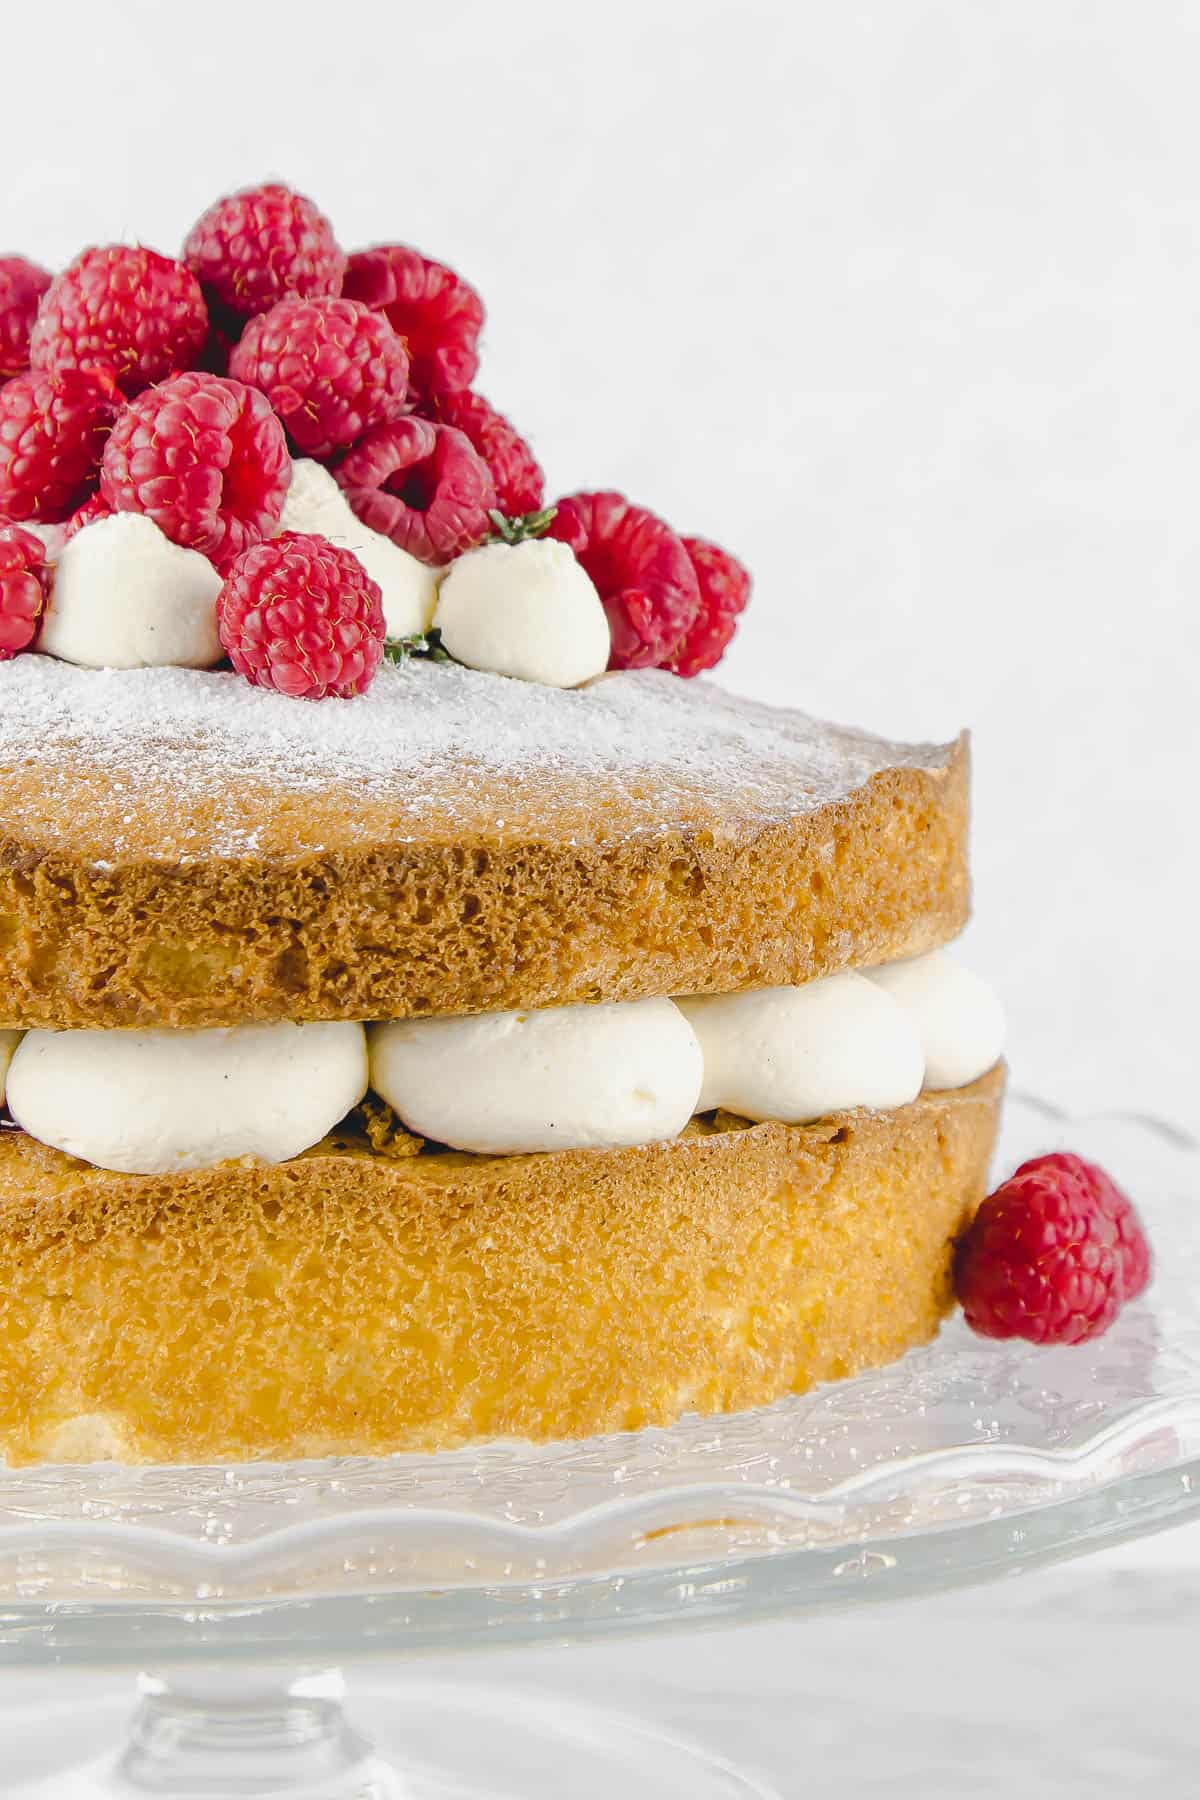 Close up of raspberry Victoria sponge with fresh cream between the cake layers